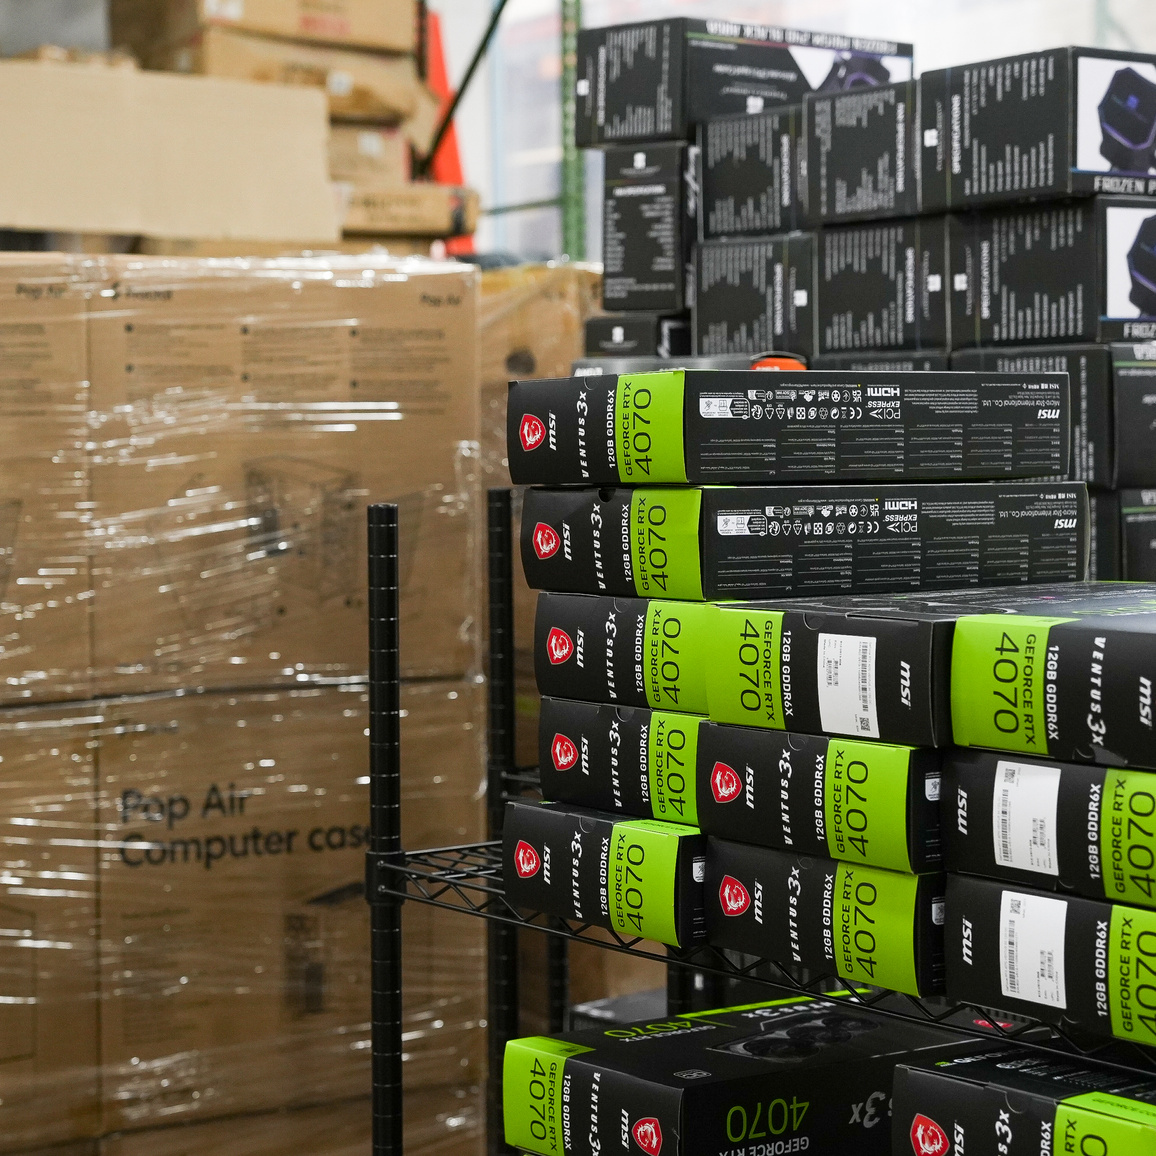 Making big moves and building in bulk with our epic 35 build gaming PC order! 🚀 #quotedtech #buildinbulk #custompc #geforcertx #nocornerscut